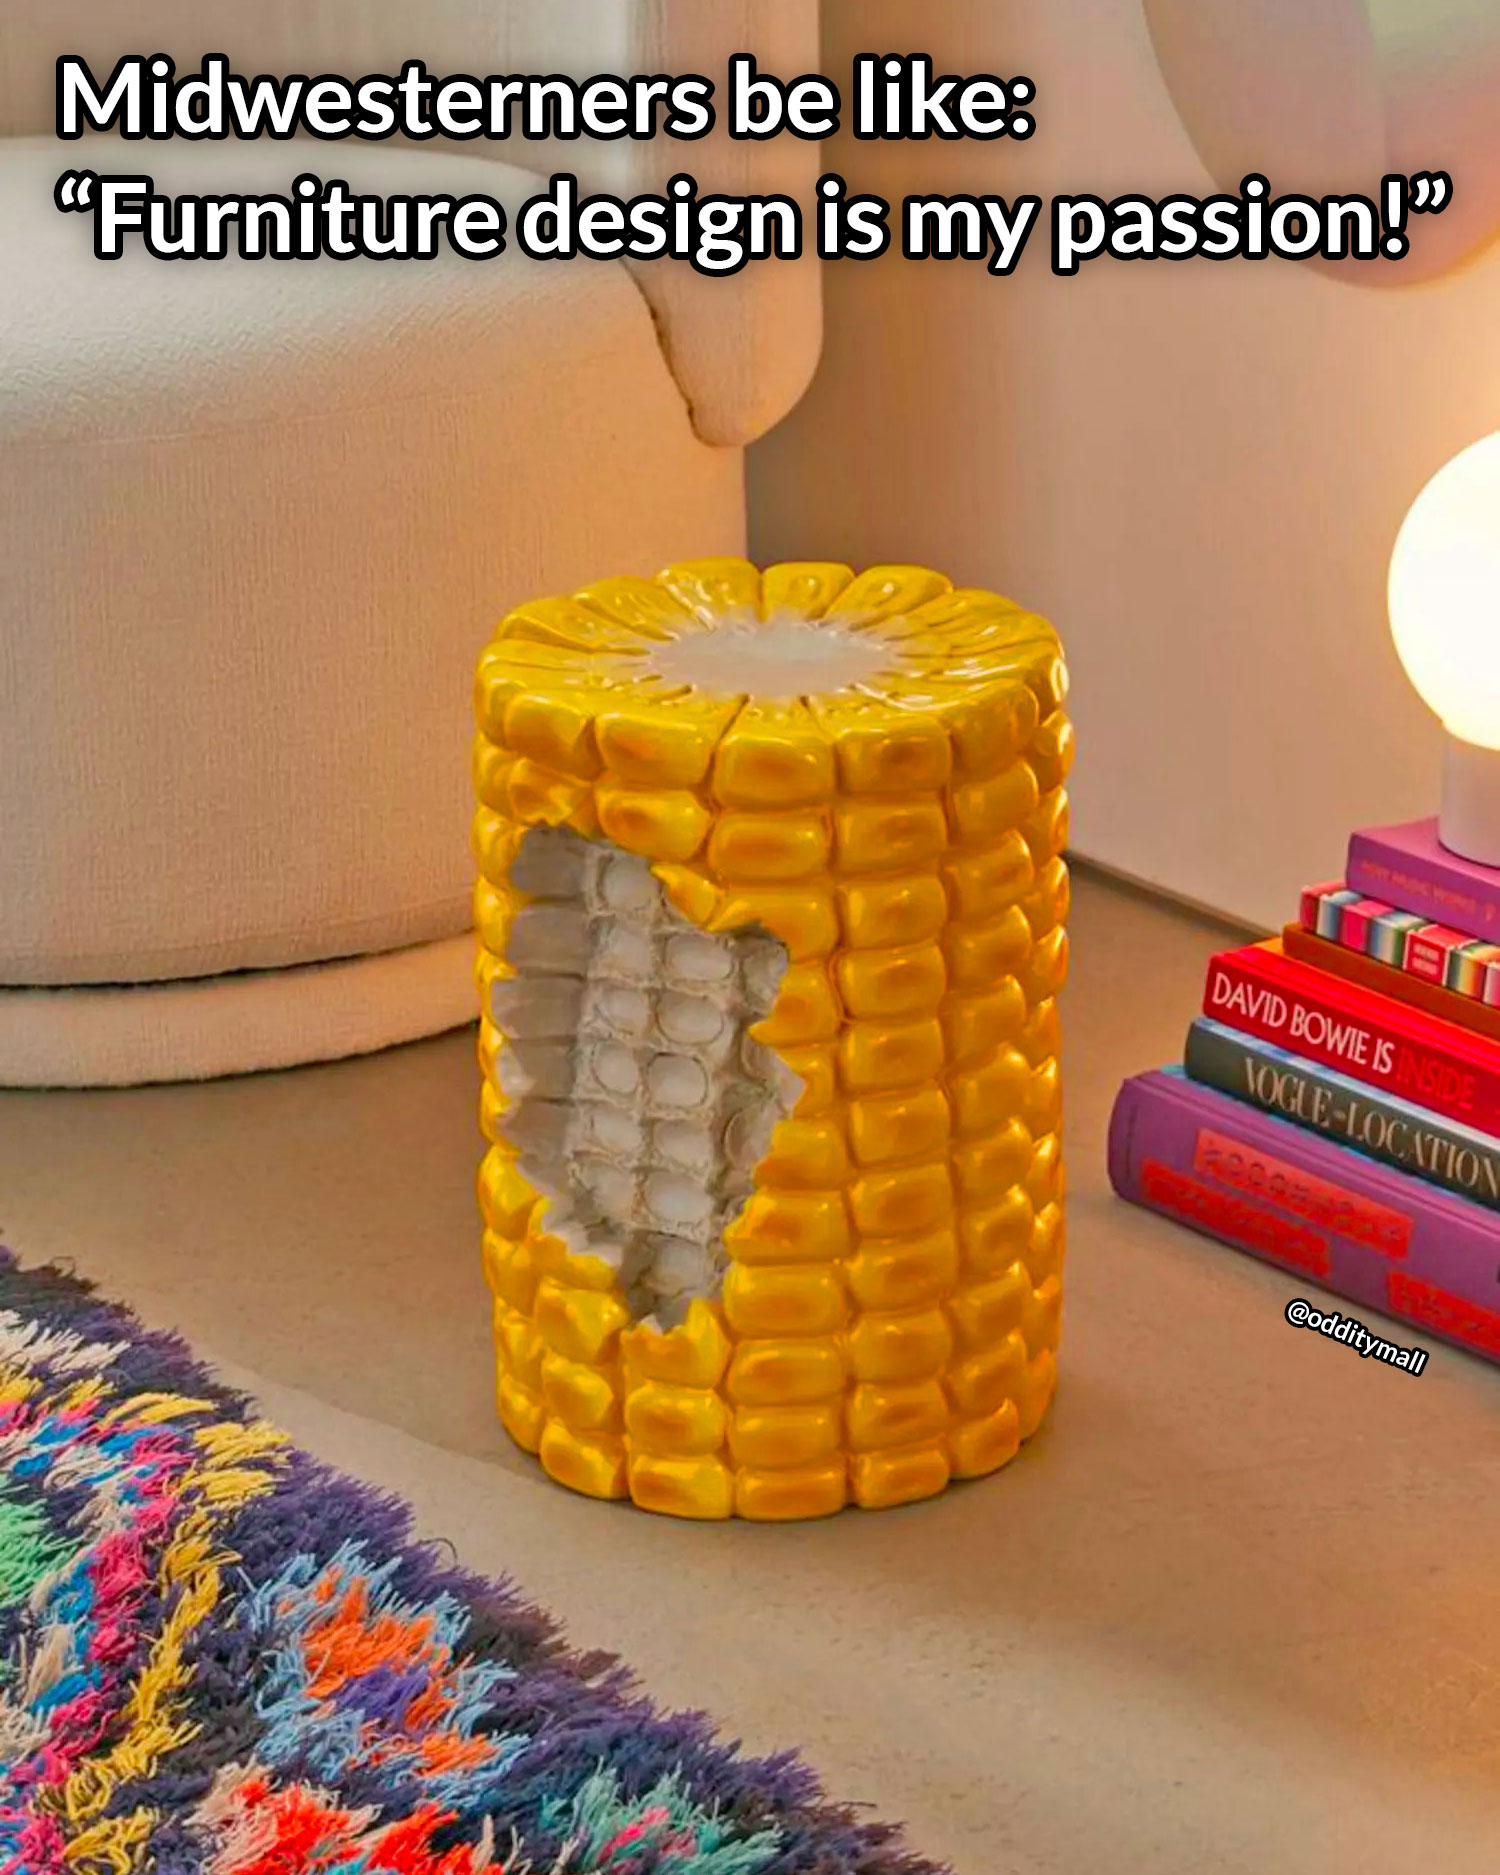 Corn Stool - Midwesterners be like Furniture design is my passion